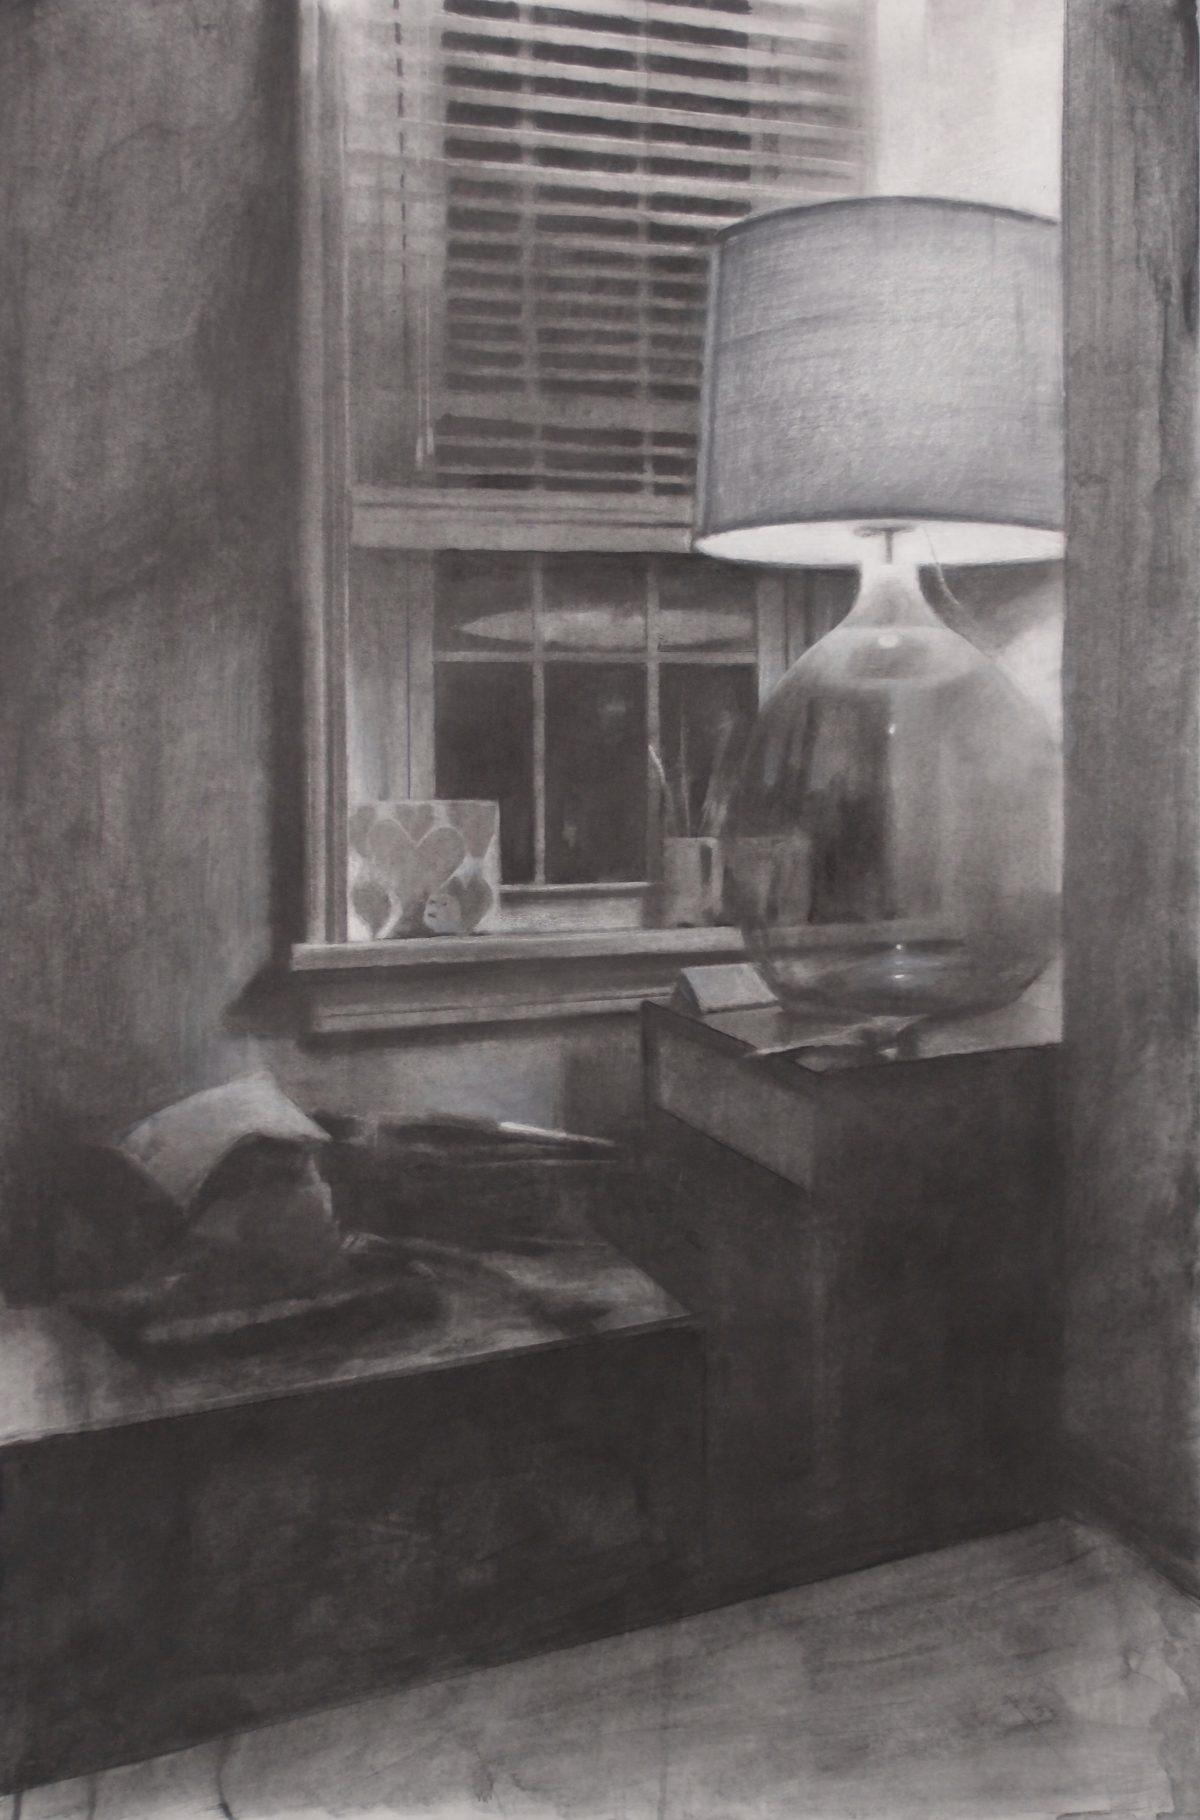  "Happy House" by Michael Grimaldi. Graphite, charcoal, and chalk on paper, 36 inches by 24 inches. (The Florence Academy of Art–U.S.)